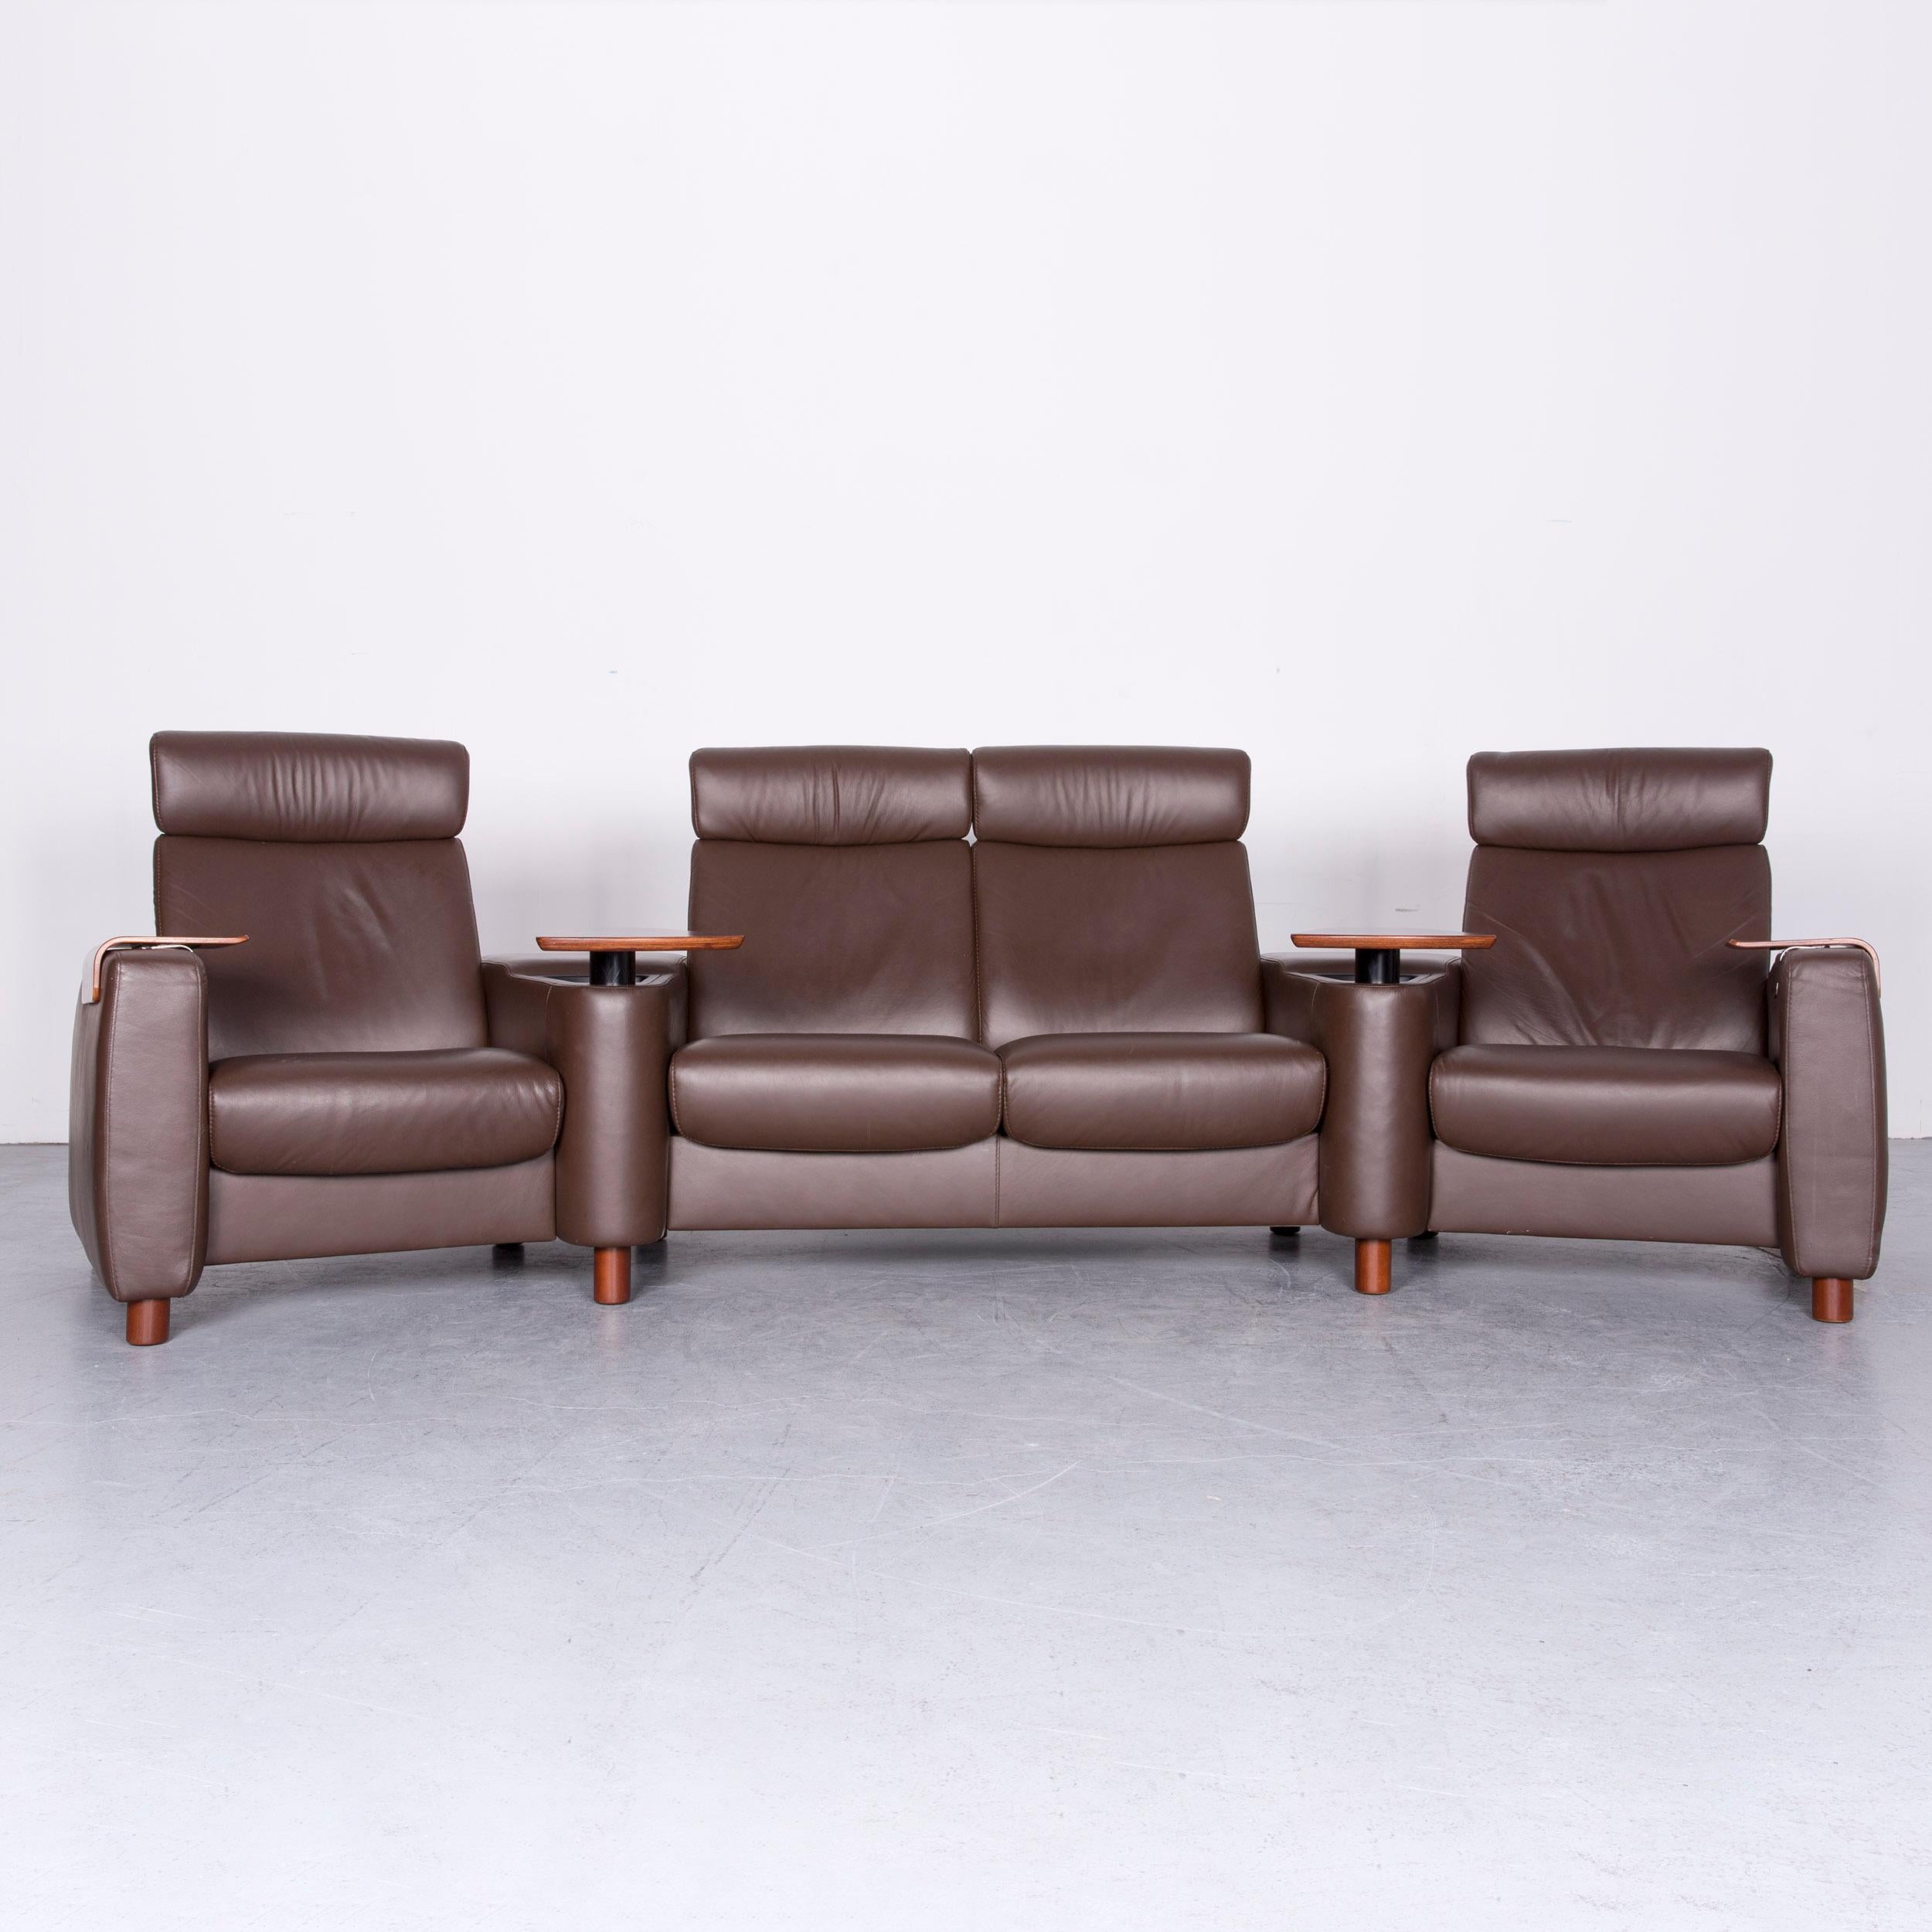 German Ekornes Stressless Arion Sofa Brown Leather Four-Seat Couch with Function